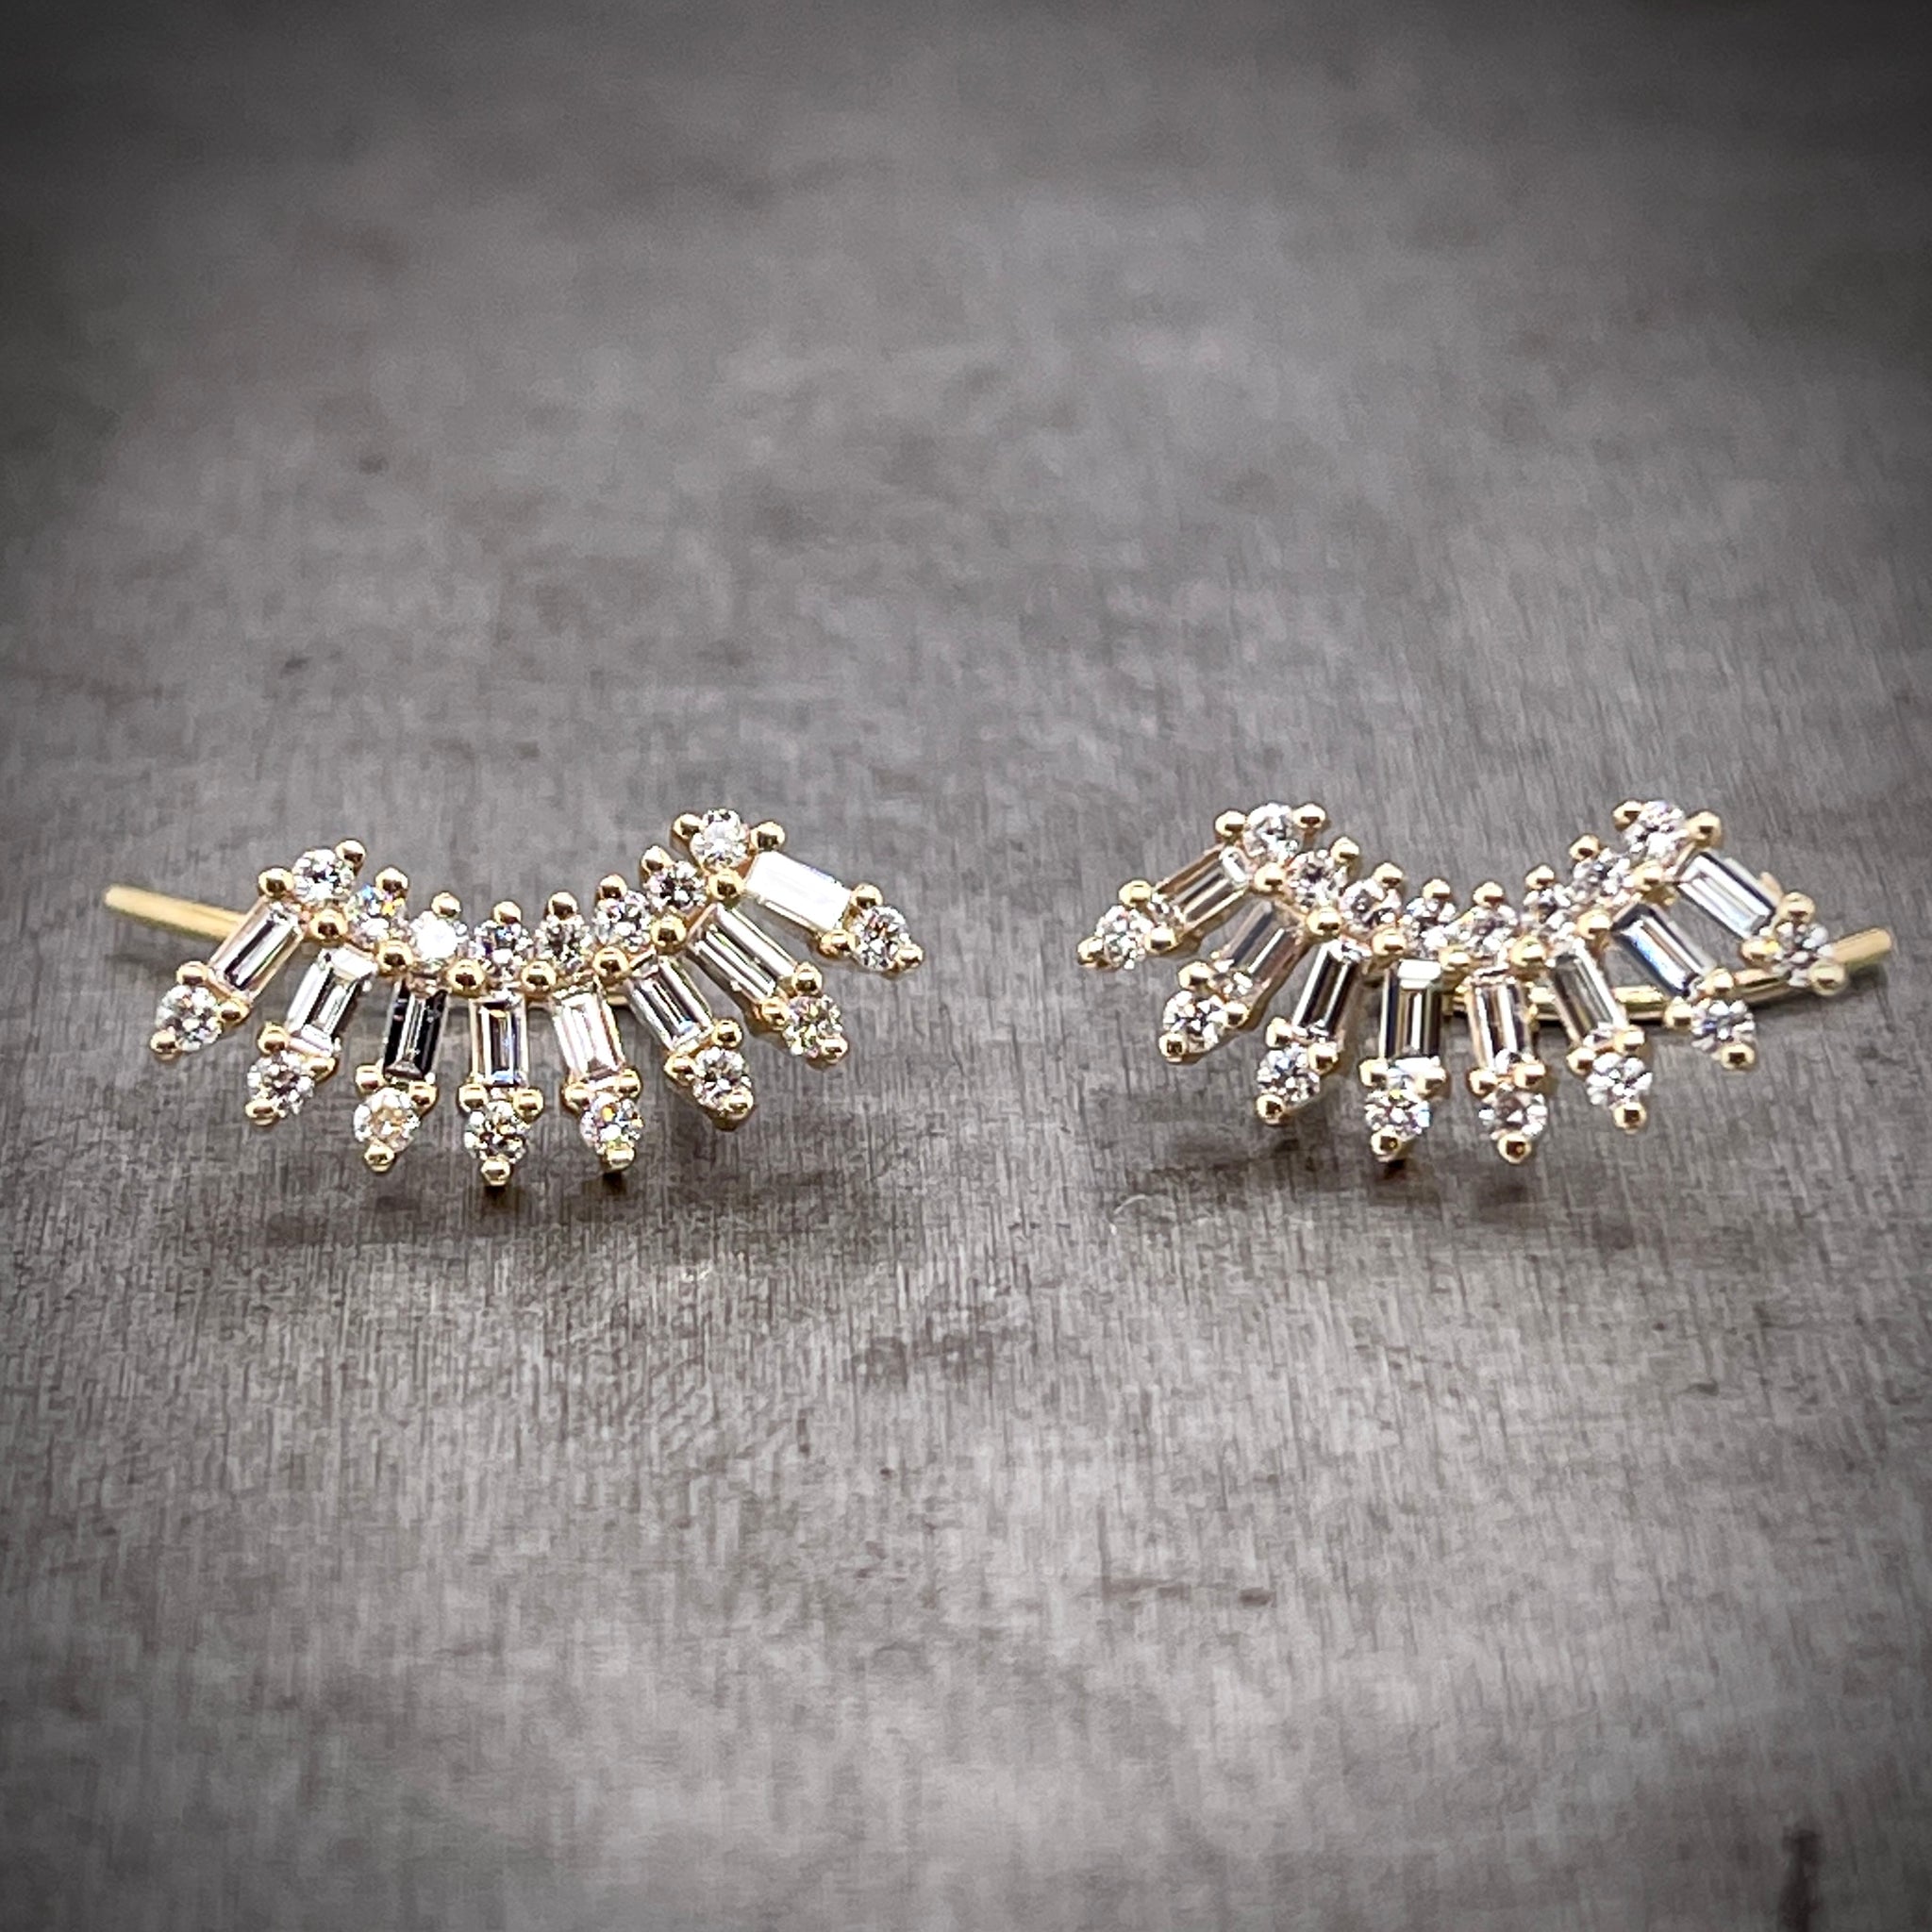 Frontal view of floral diamond ear climbers. These earrings feature a curved silhouette with the first layer being round brilliant diamonds, the second being baguette diamonds and the third being round brilliant diamonds. Each layer fans out more creating the perfect curvature for sitting on your ear.